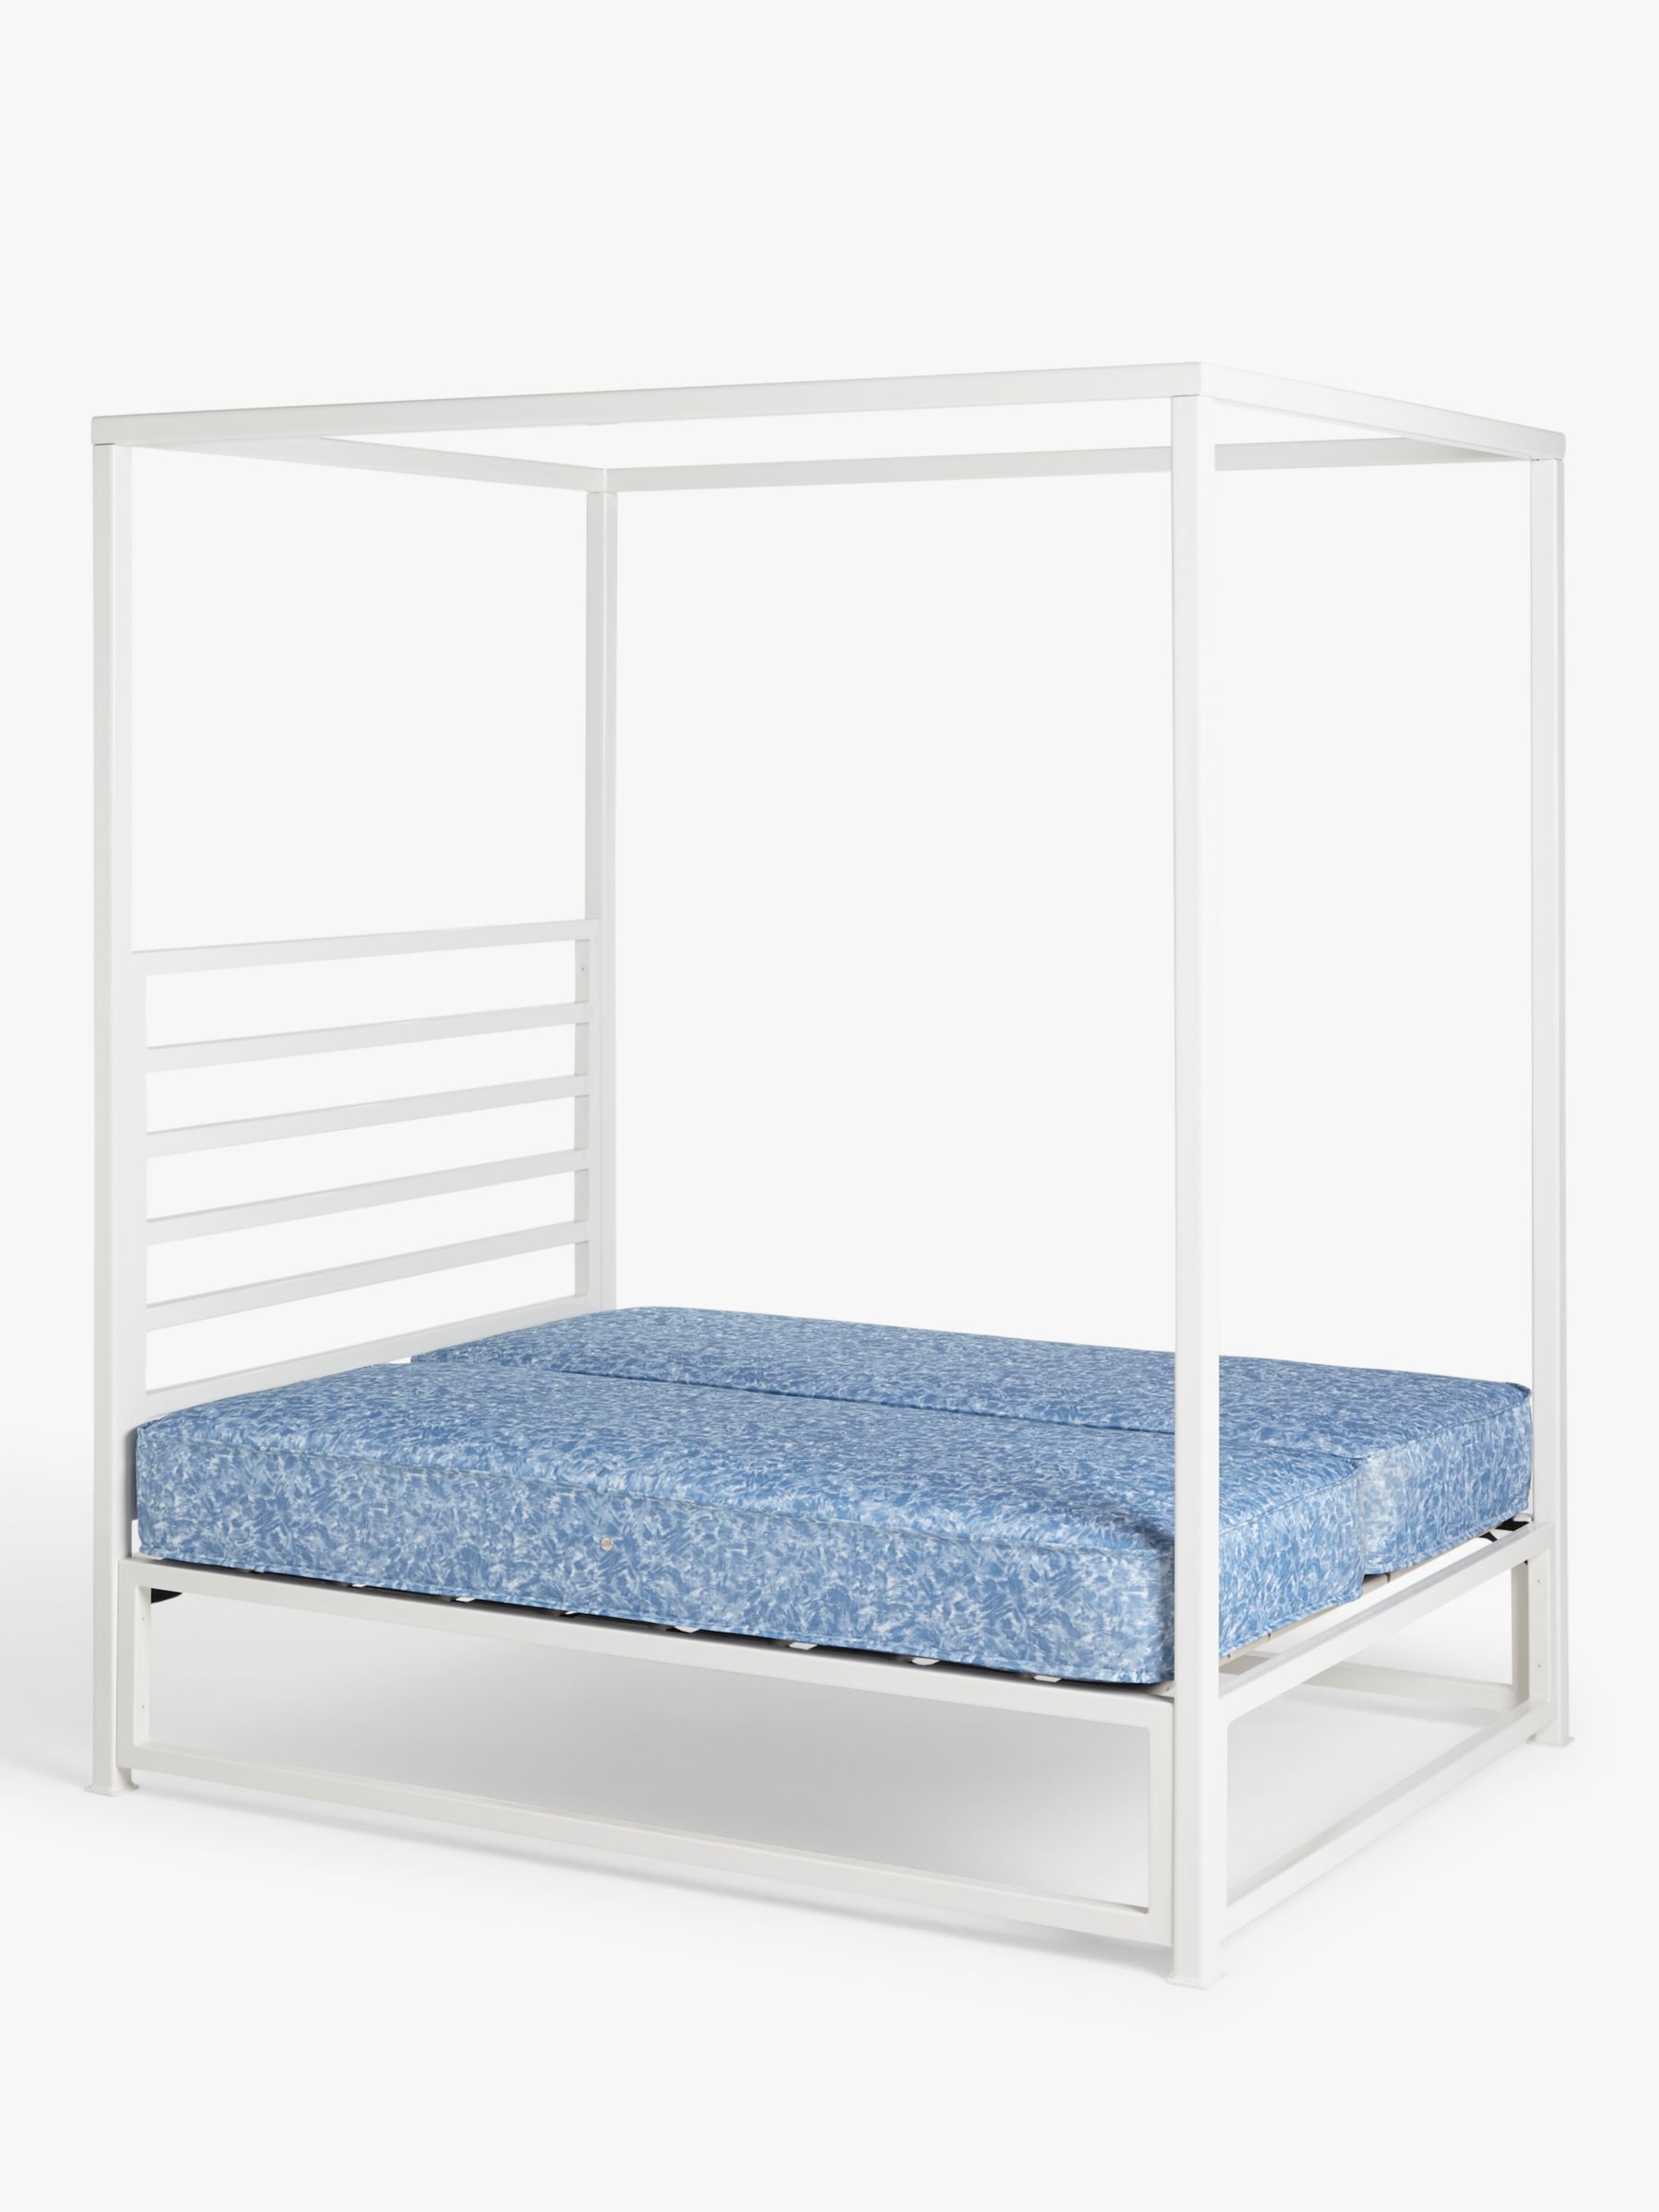 Sunna 4 Poster Outdoor Bed Frame, Outdoor Bunk Bed